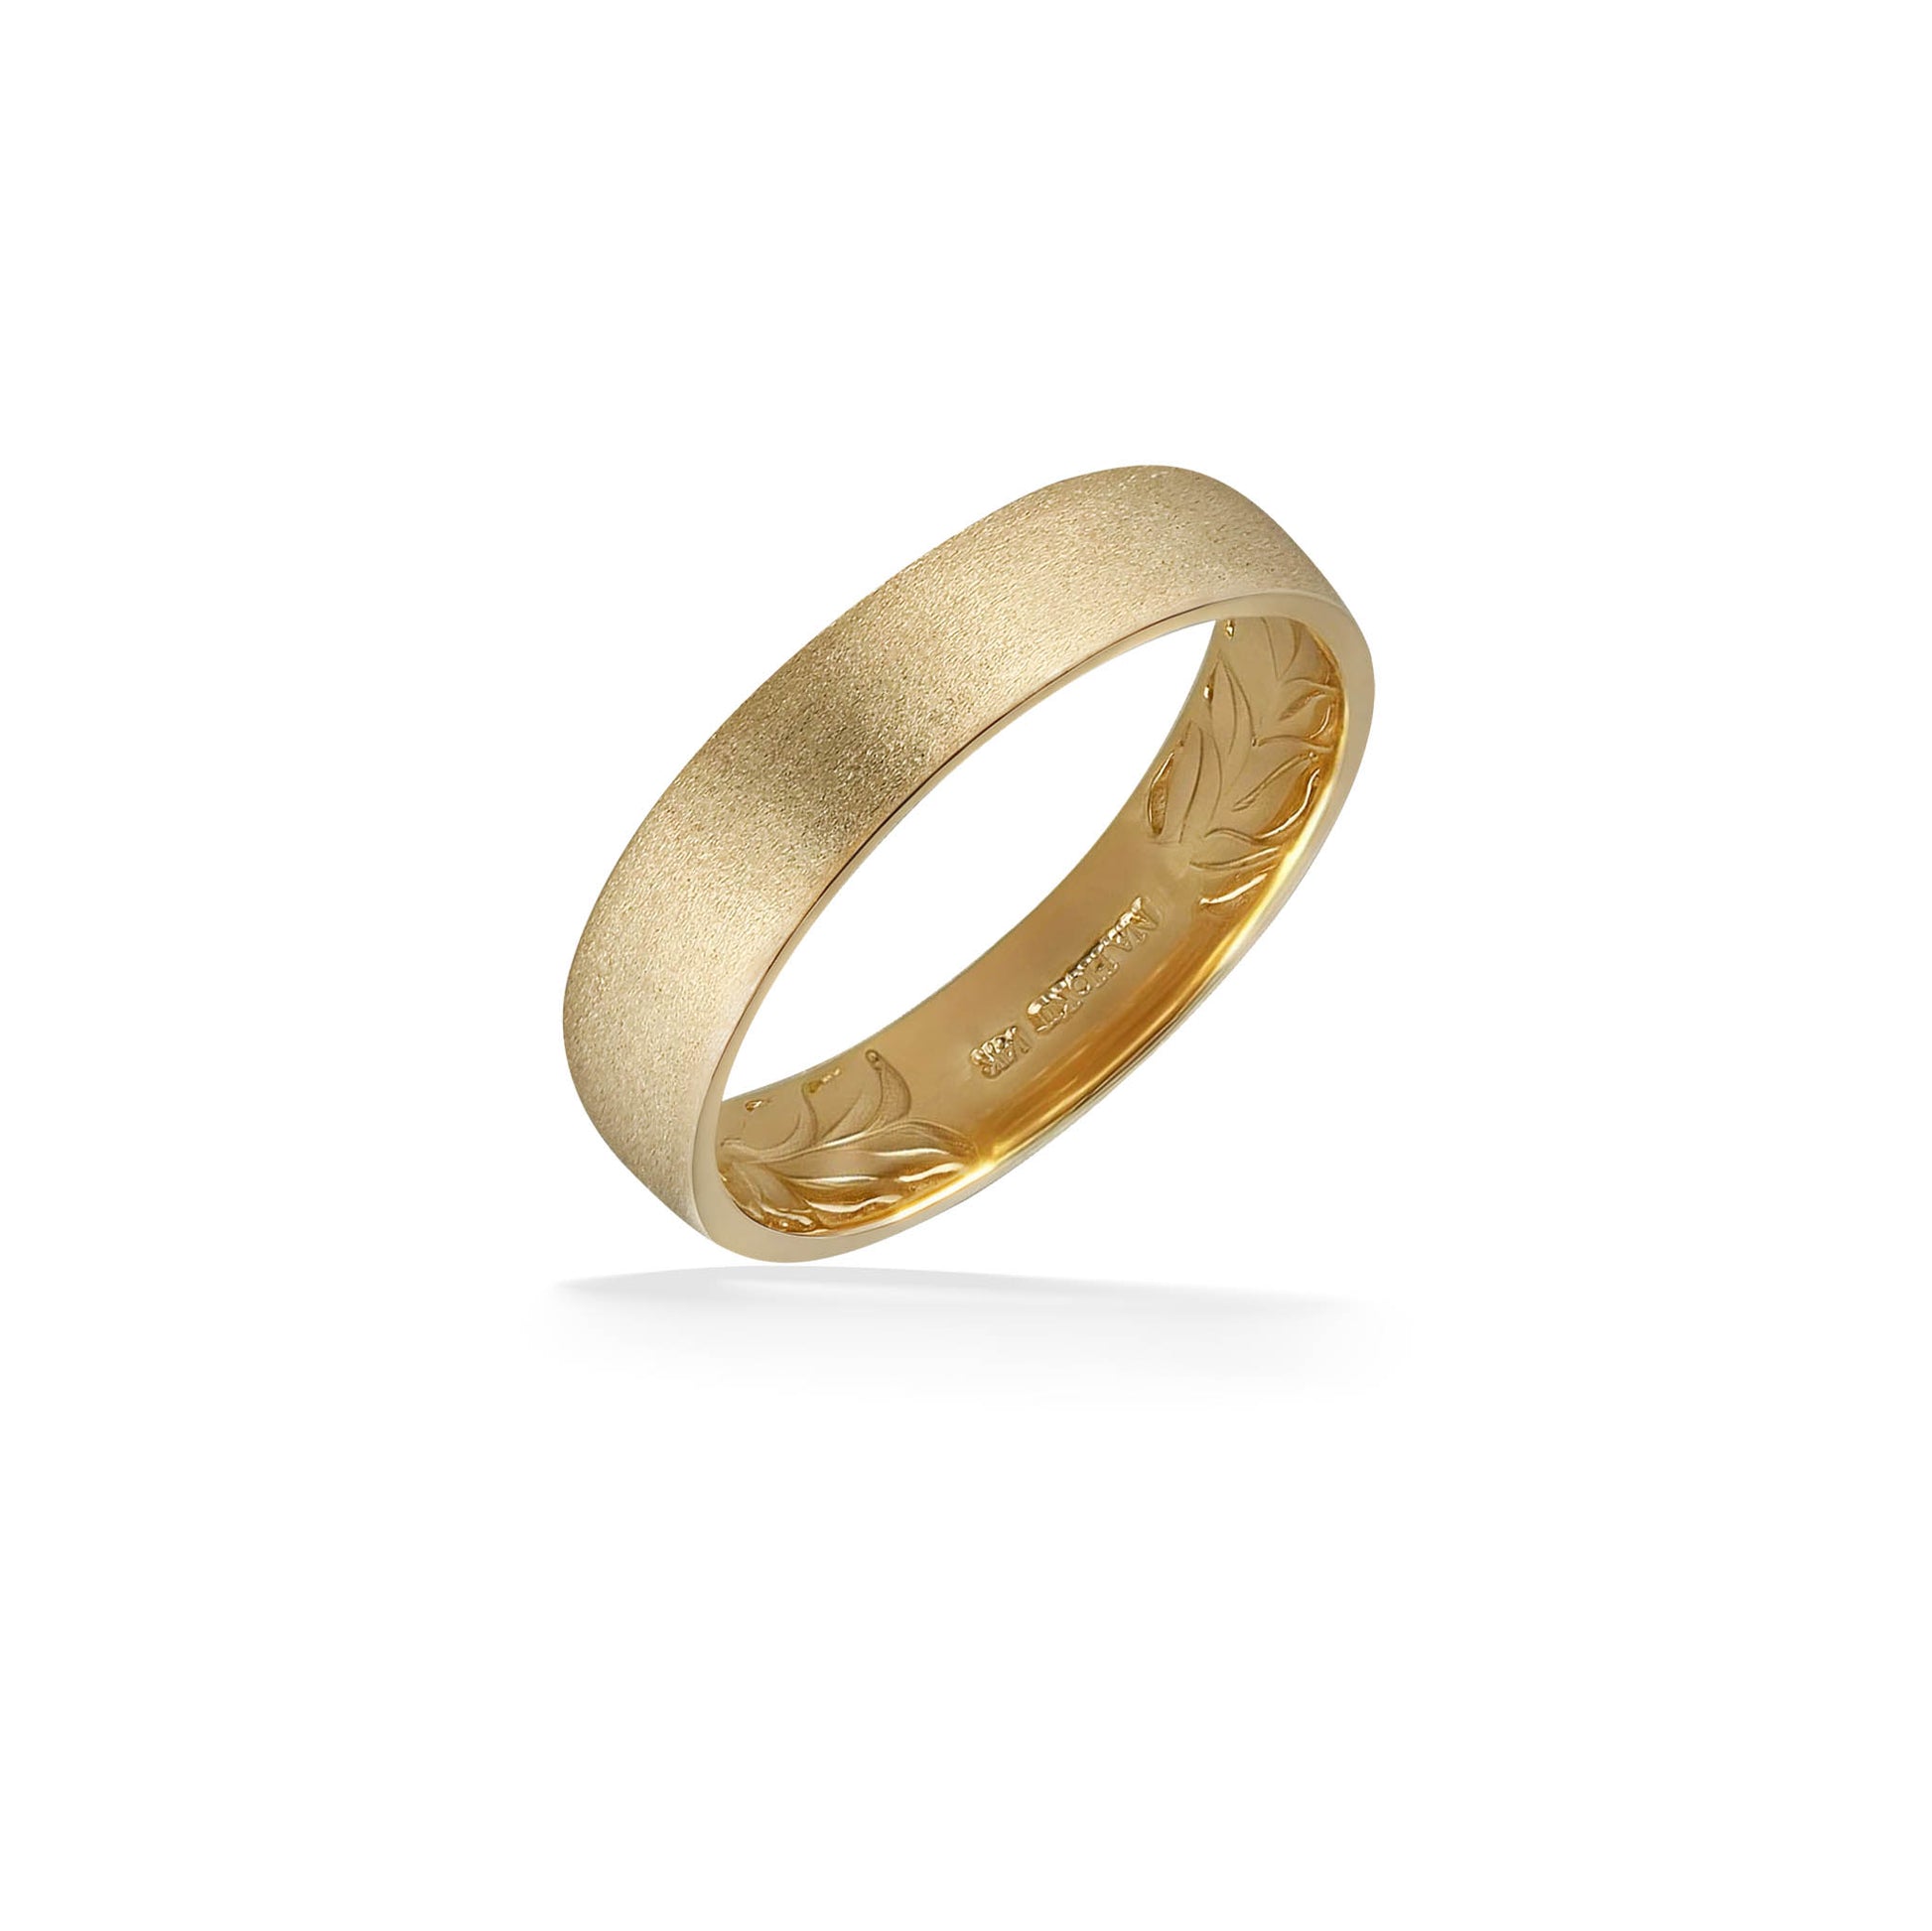 44522 - 14K Yellow Gold - Maile Leaf Men's Band